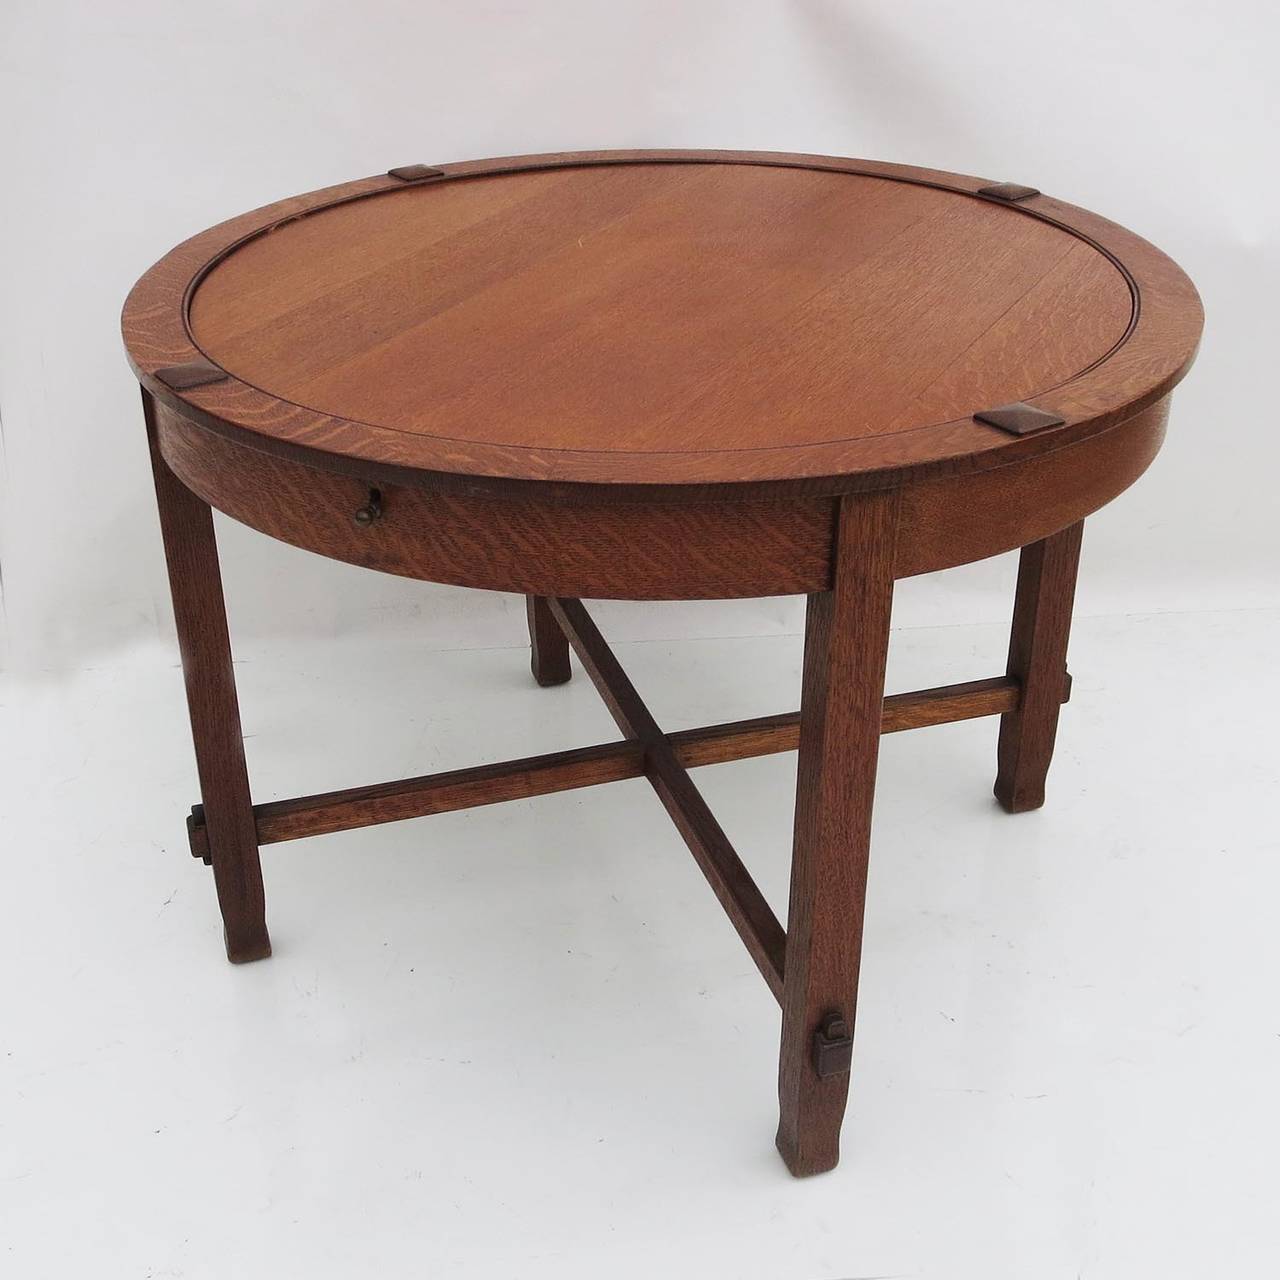 A great table by an unknown maker, the work is similar to Stickley or Limbert furnishings of the same period. The table is executed in highly flamed quarter sawn oak, in a pleasing original satin finish. With the pull of the side mounted knob, the